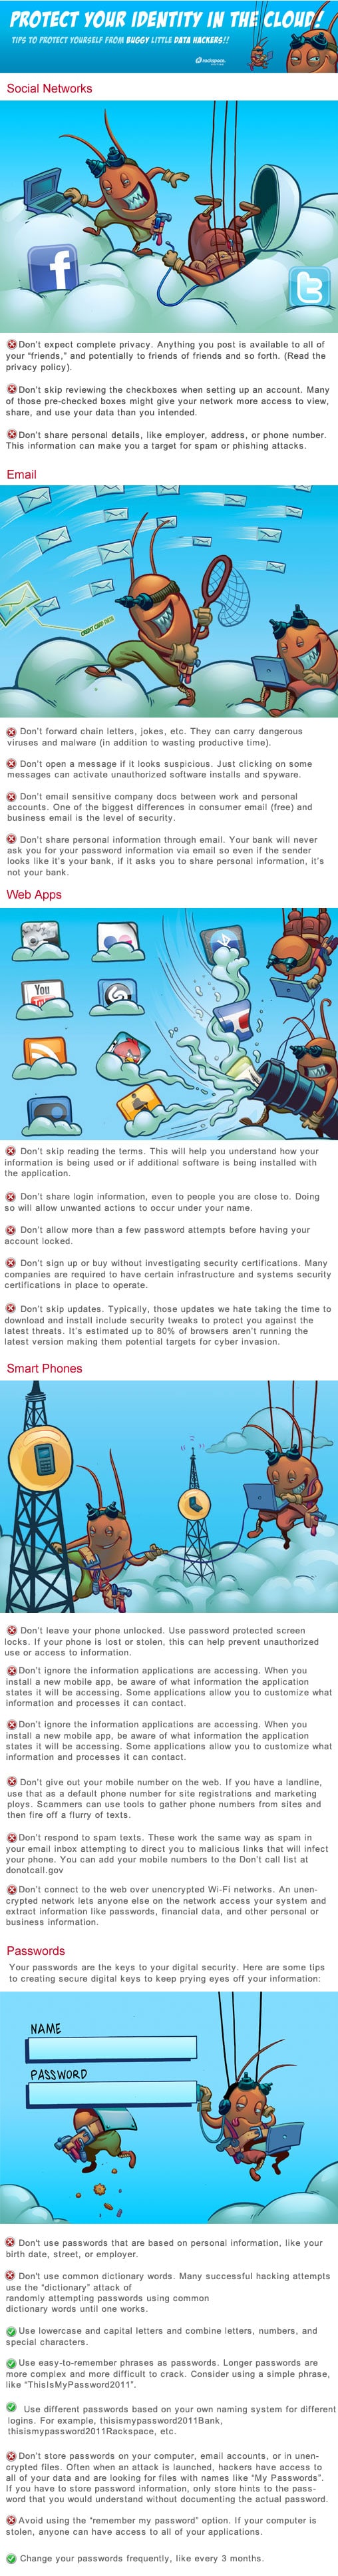 26 Vital Tips For Better Cloud Security [Infographic]